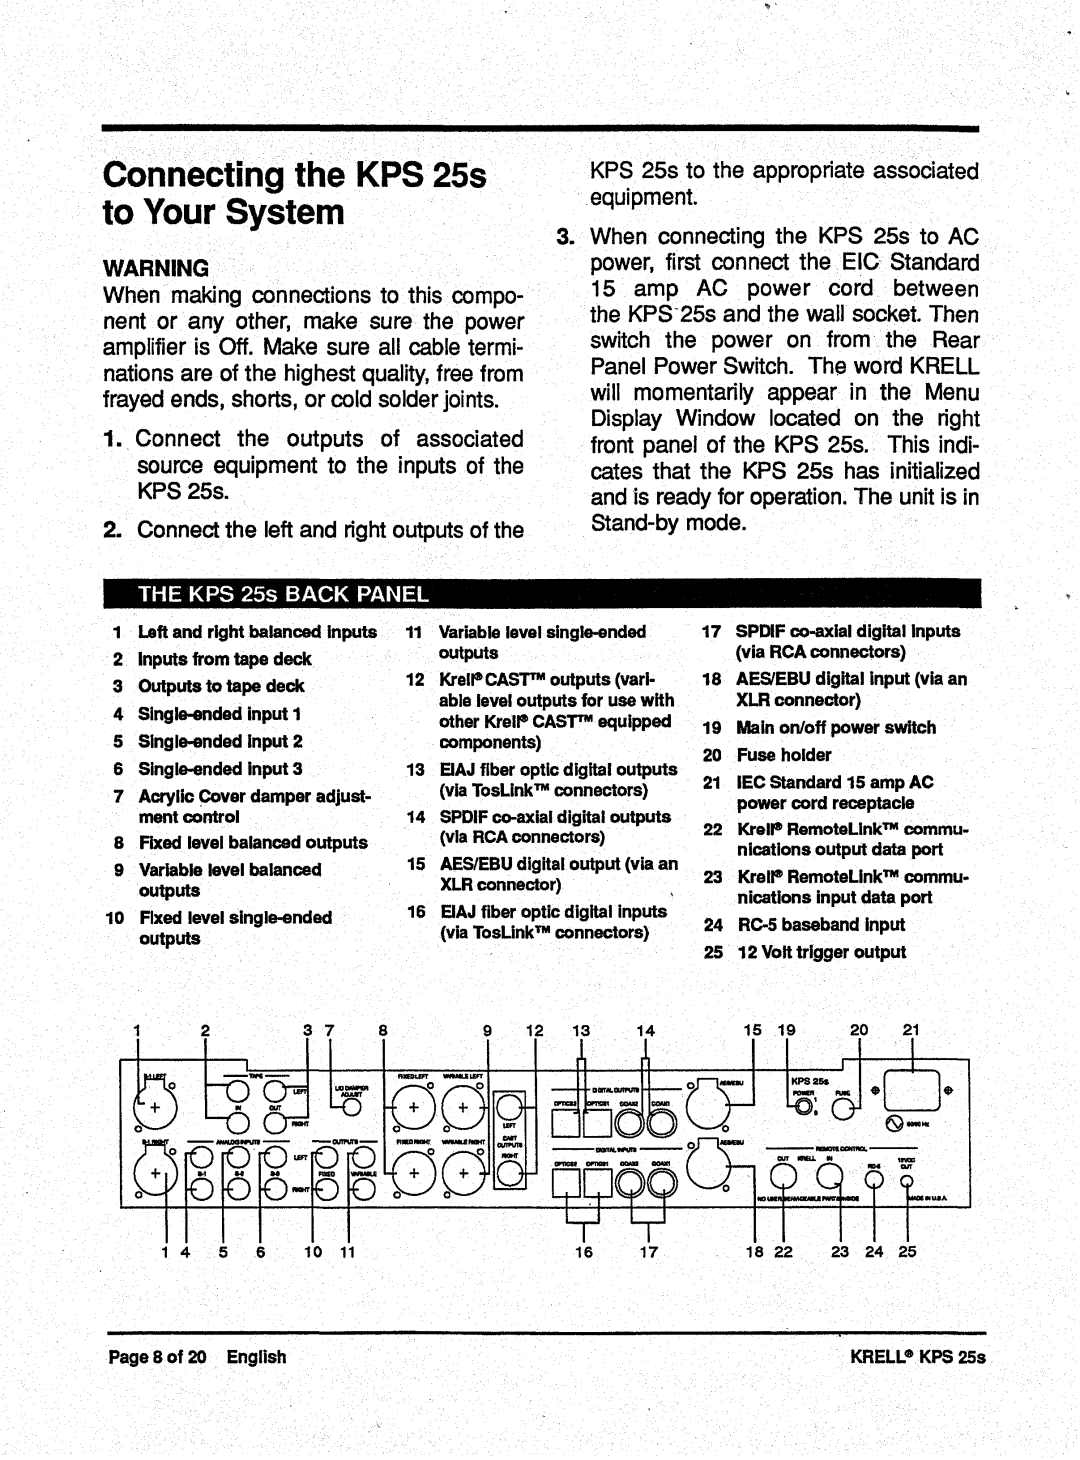 Krell Industries KPS 25s manual Connectingthe KPS25s to Your System 